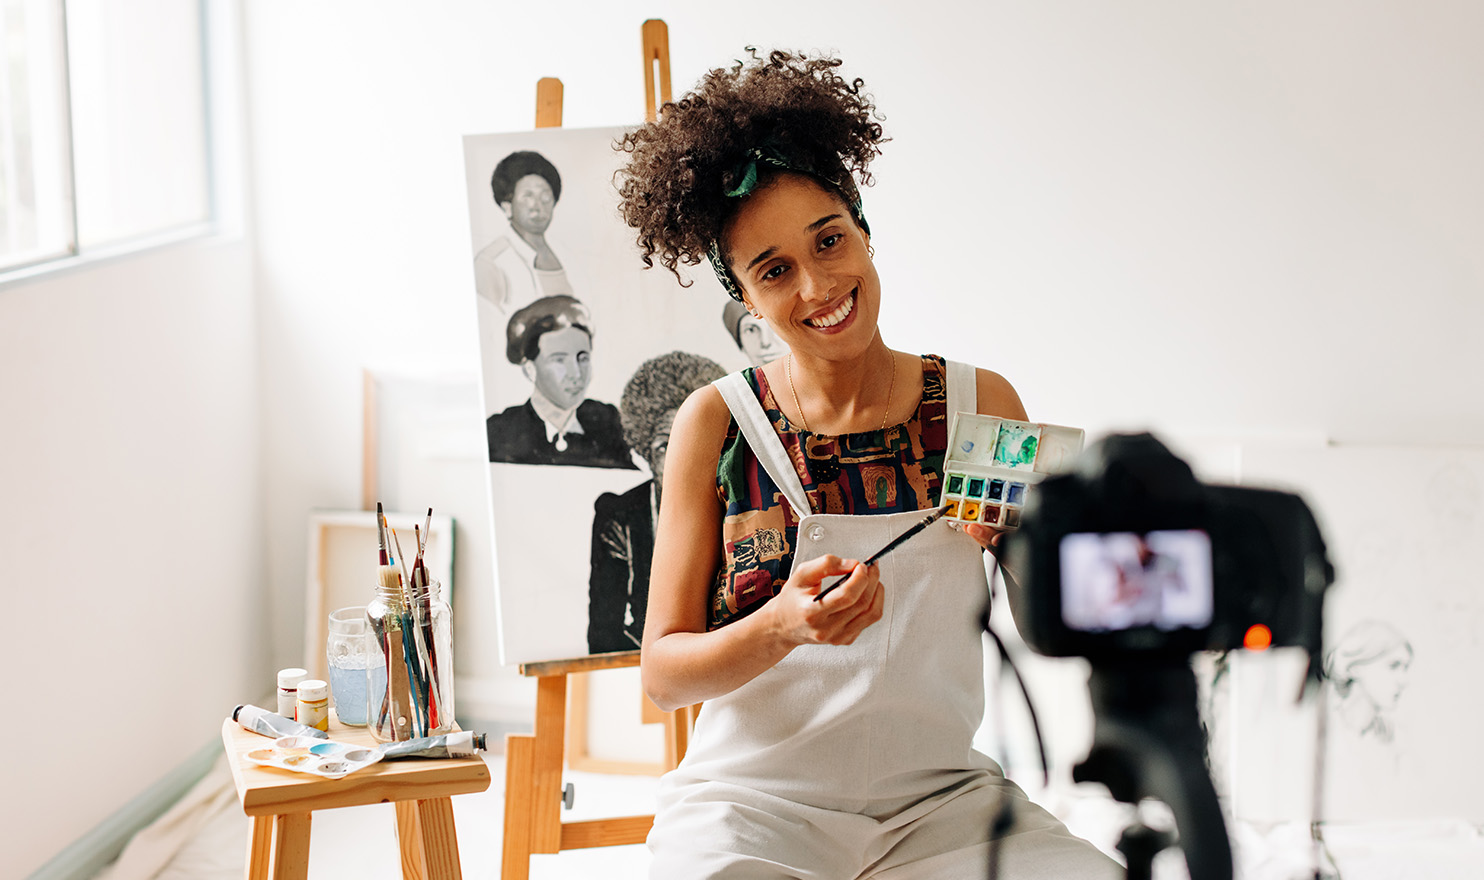 An artist is filming herself in her studio as she makes a video for her social media channels.